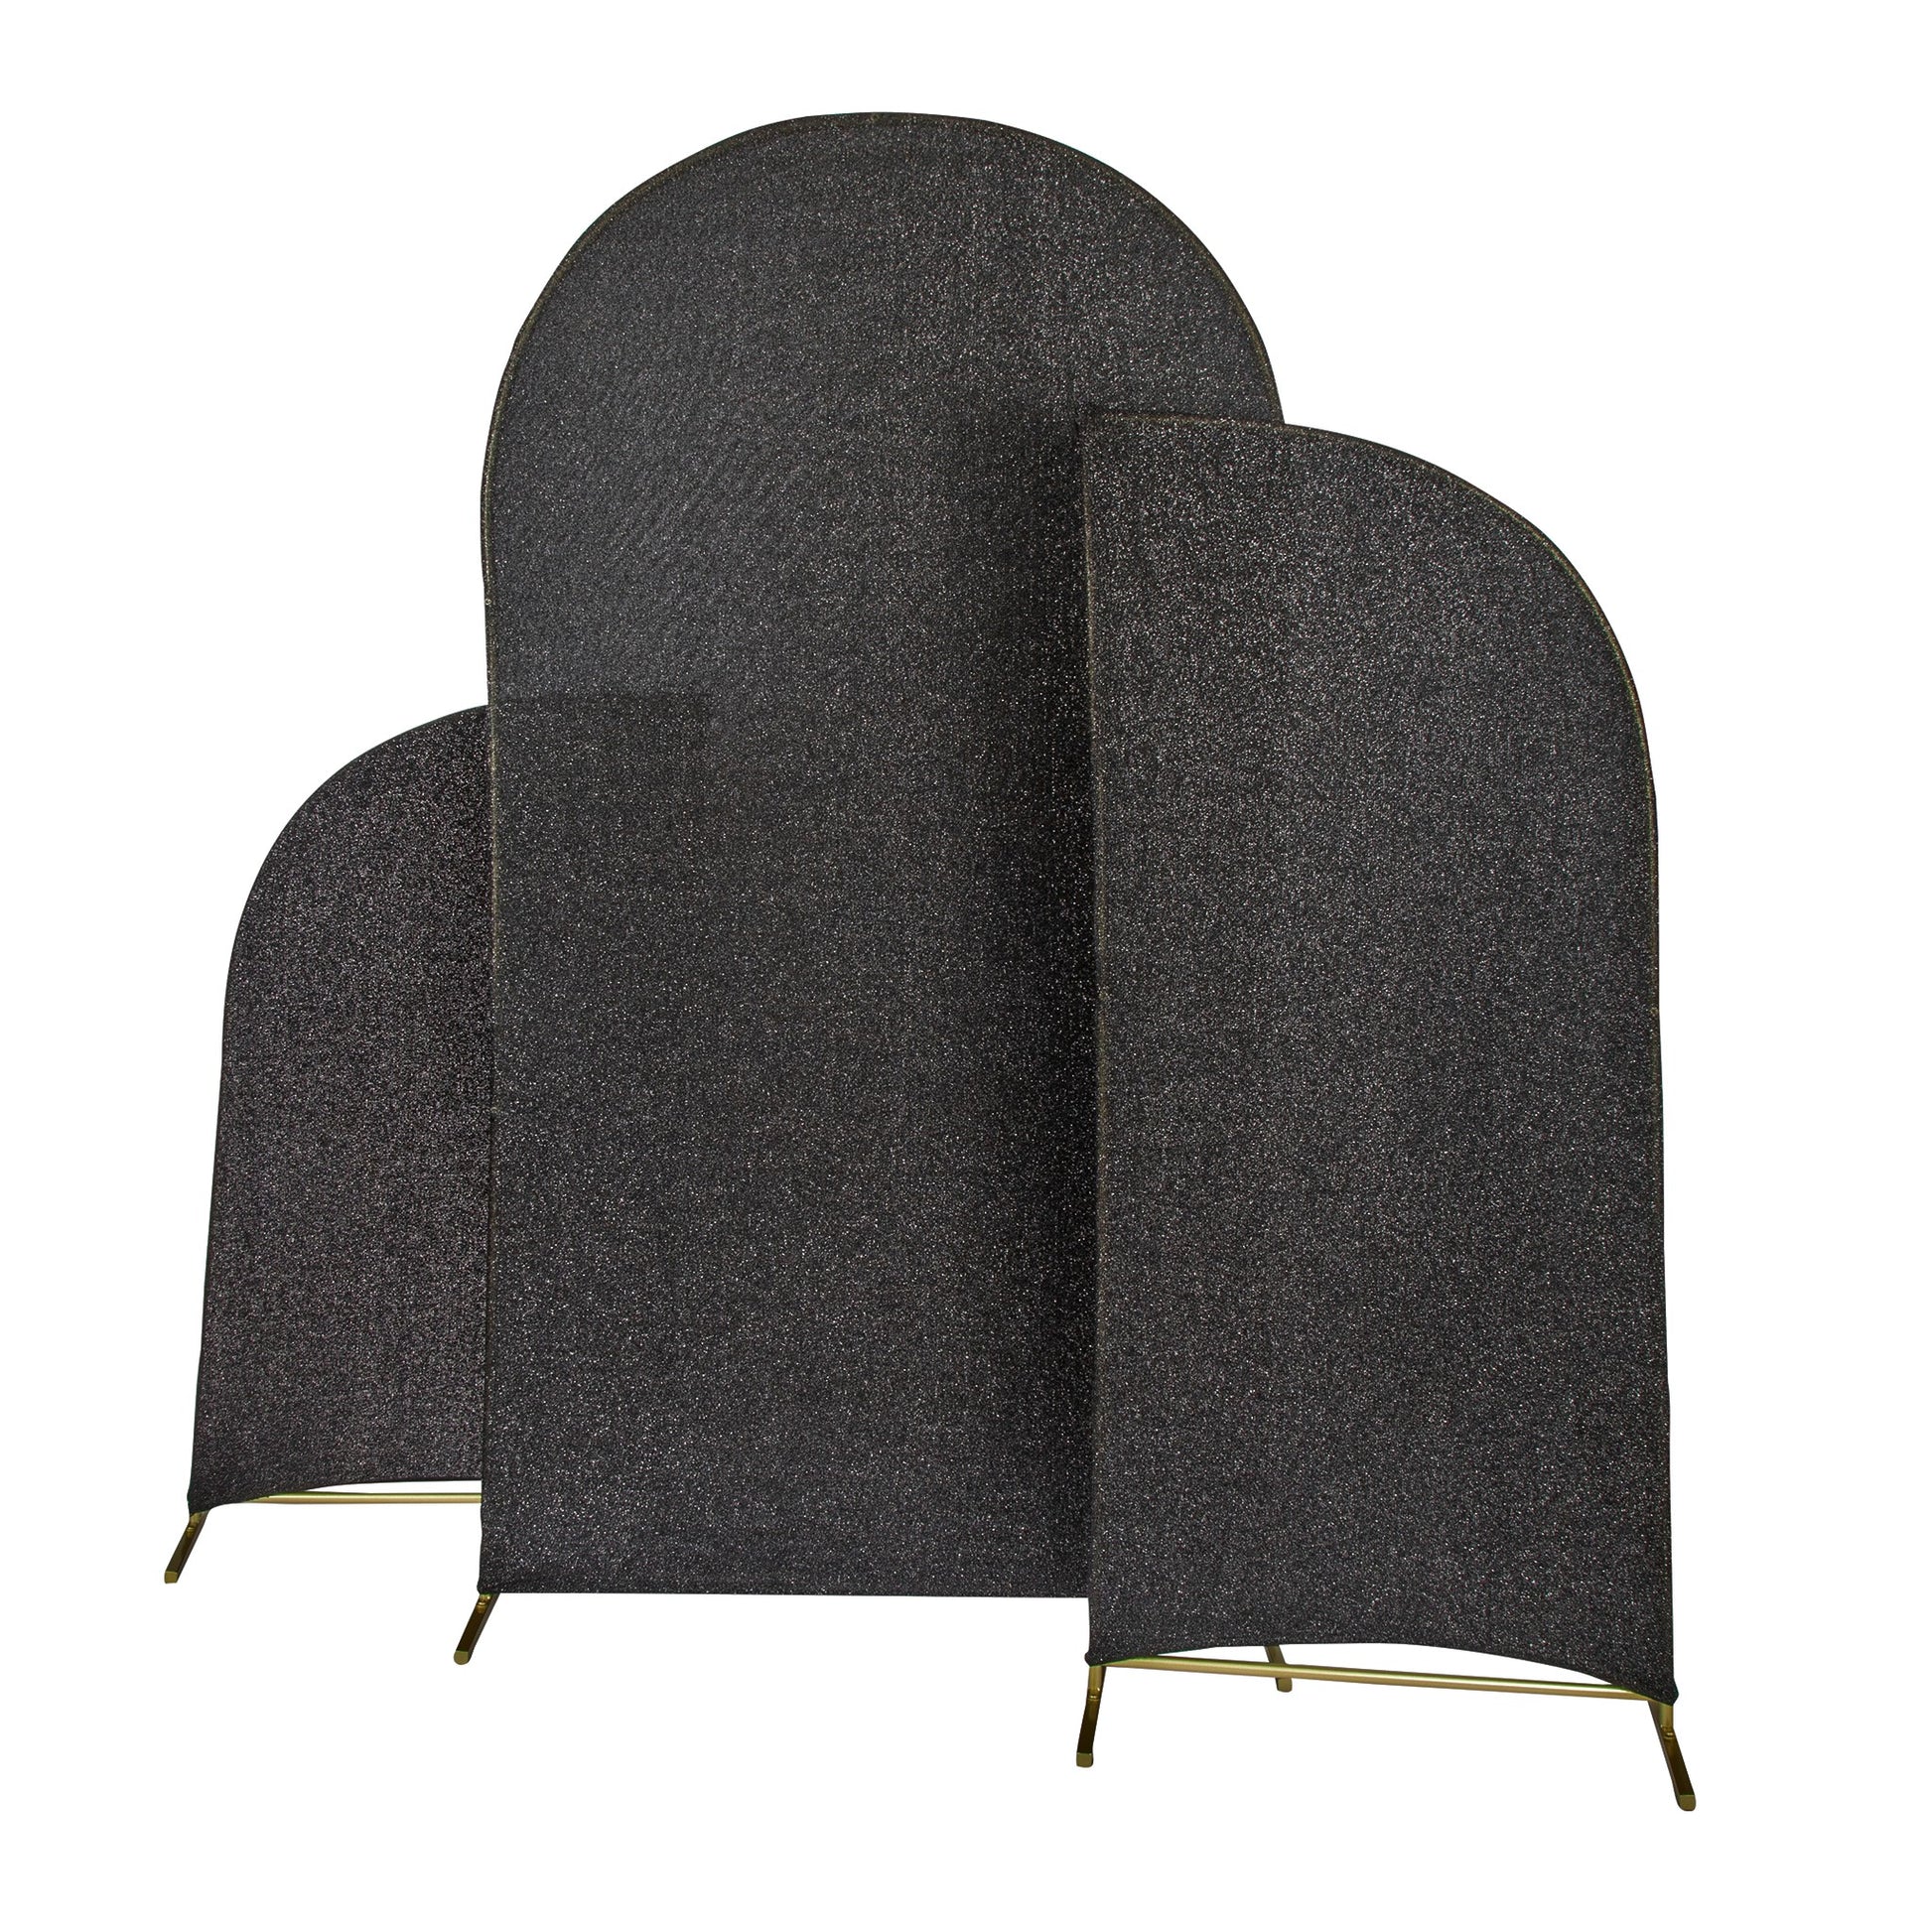 Shimmer Spandex Arch Covers for Chiara Frame Backdrop 3pc/set - Black